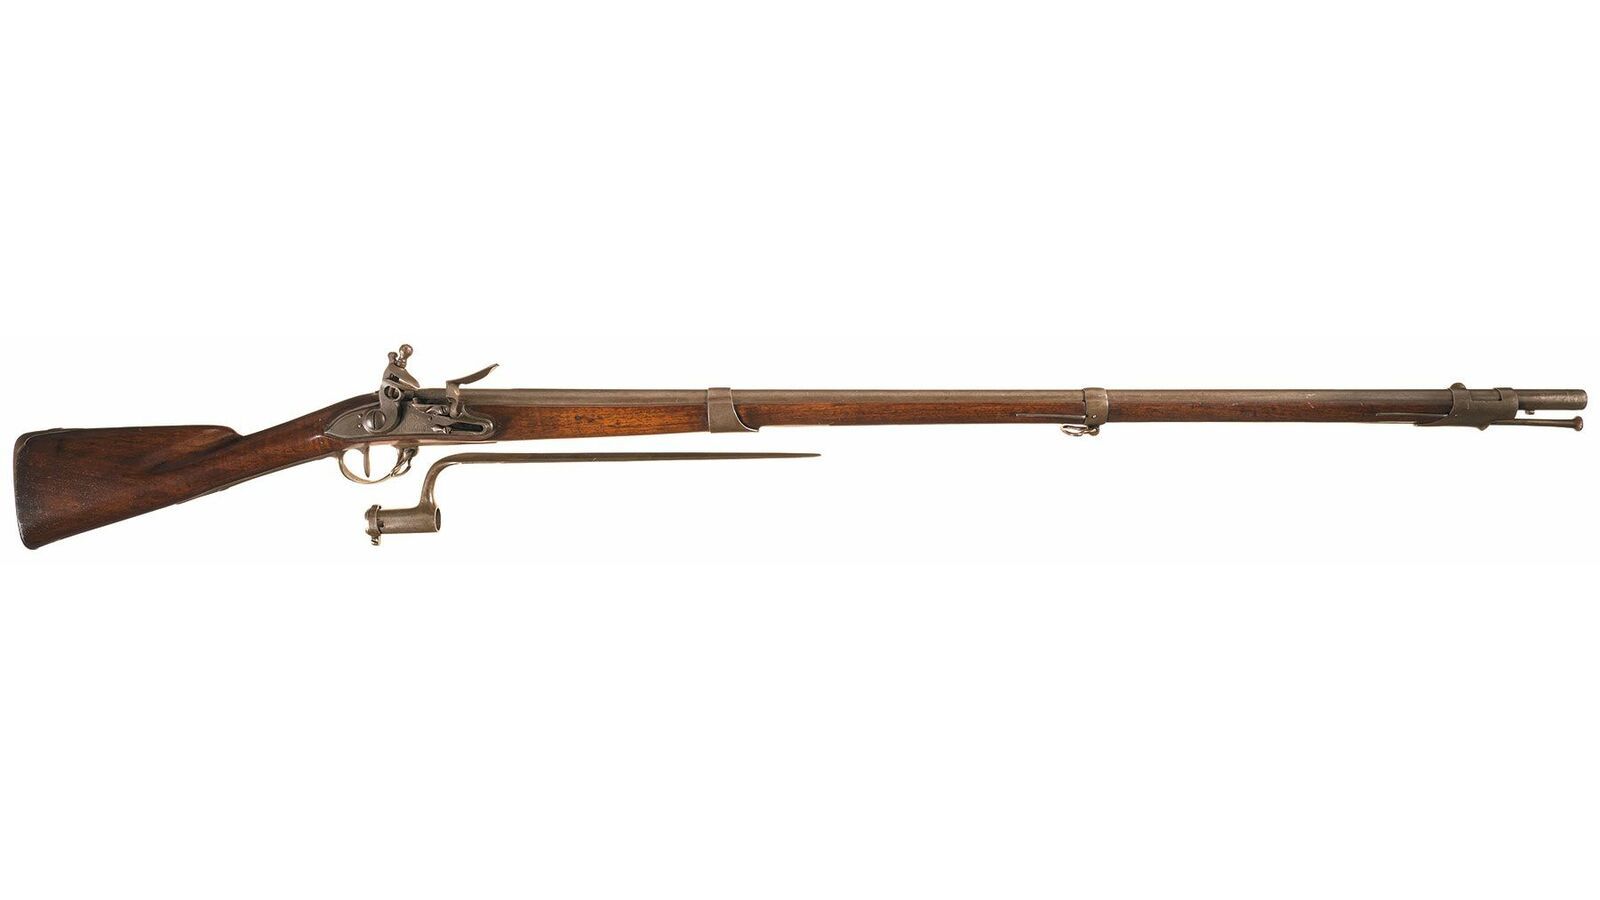 Charleville Musket Weapons from the Revolutionary War